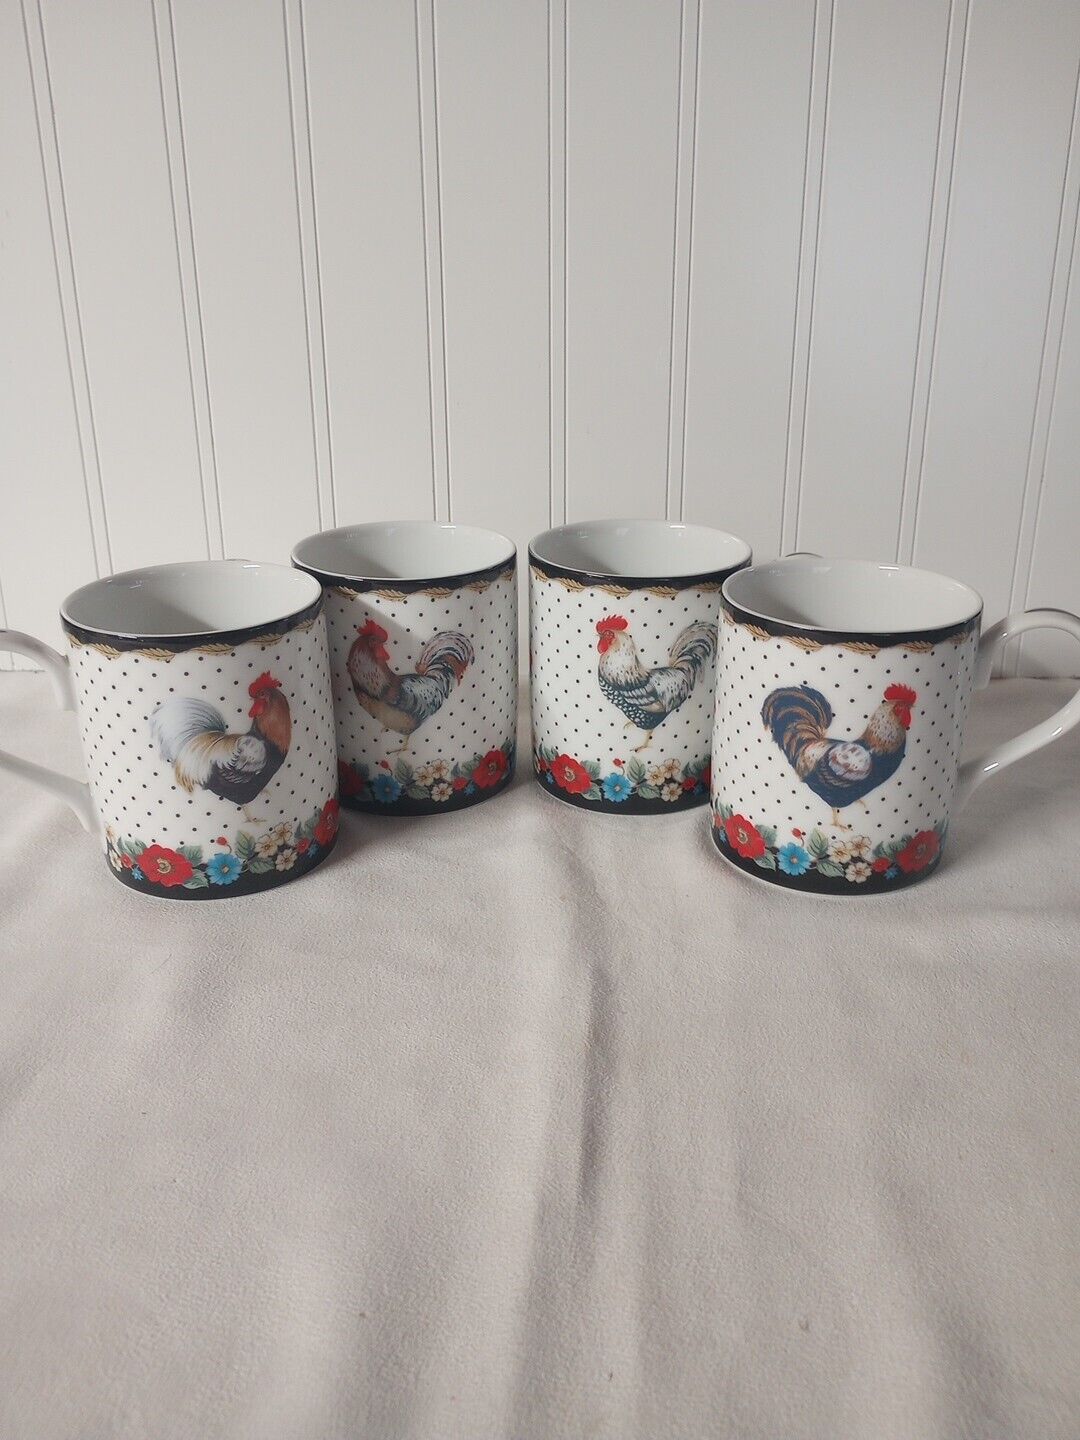 VERA BRADLEY ROOSTER CUP MUG MY HOME COLLECTION ANDREA BY SADEK SET 4